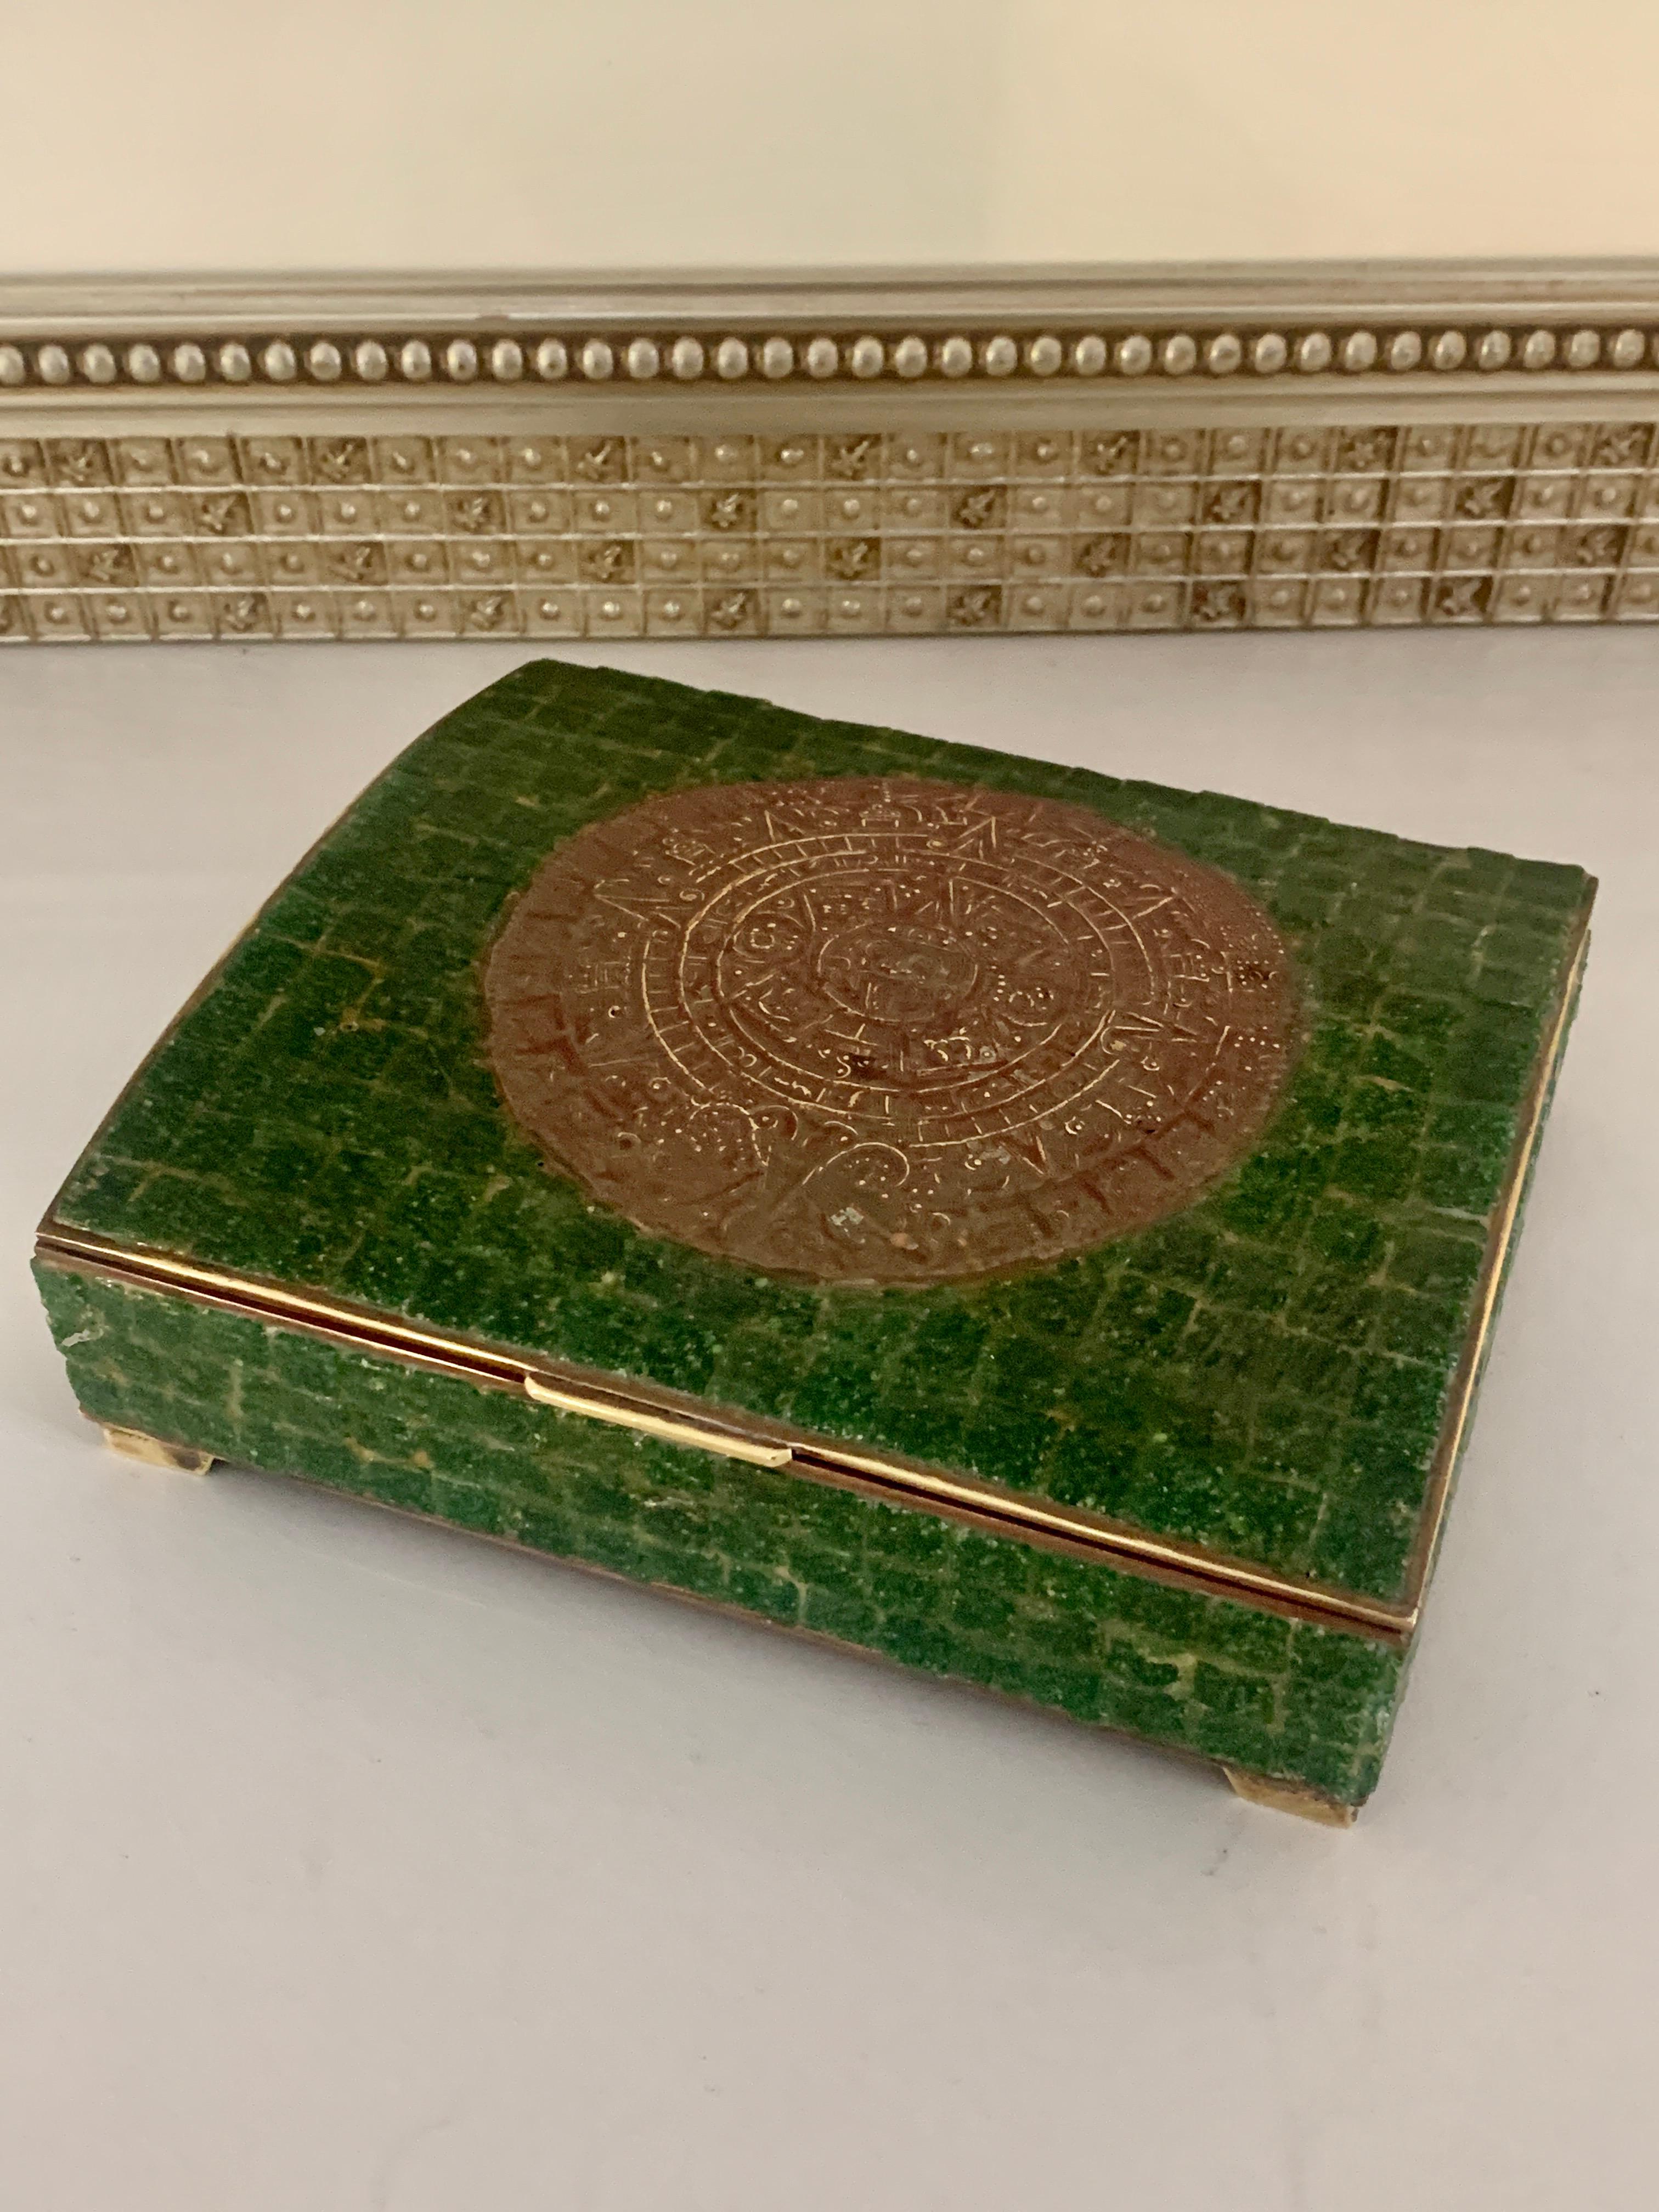 20th Century Hand Made Mexican Brass and Stone Trinket Stash Box of Aztec Calendar Medallion